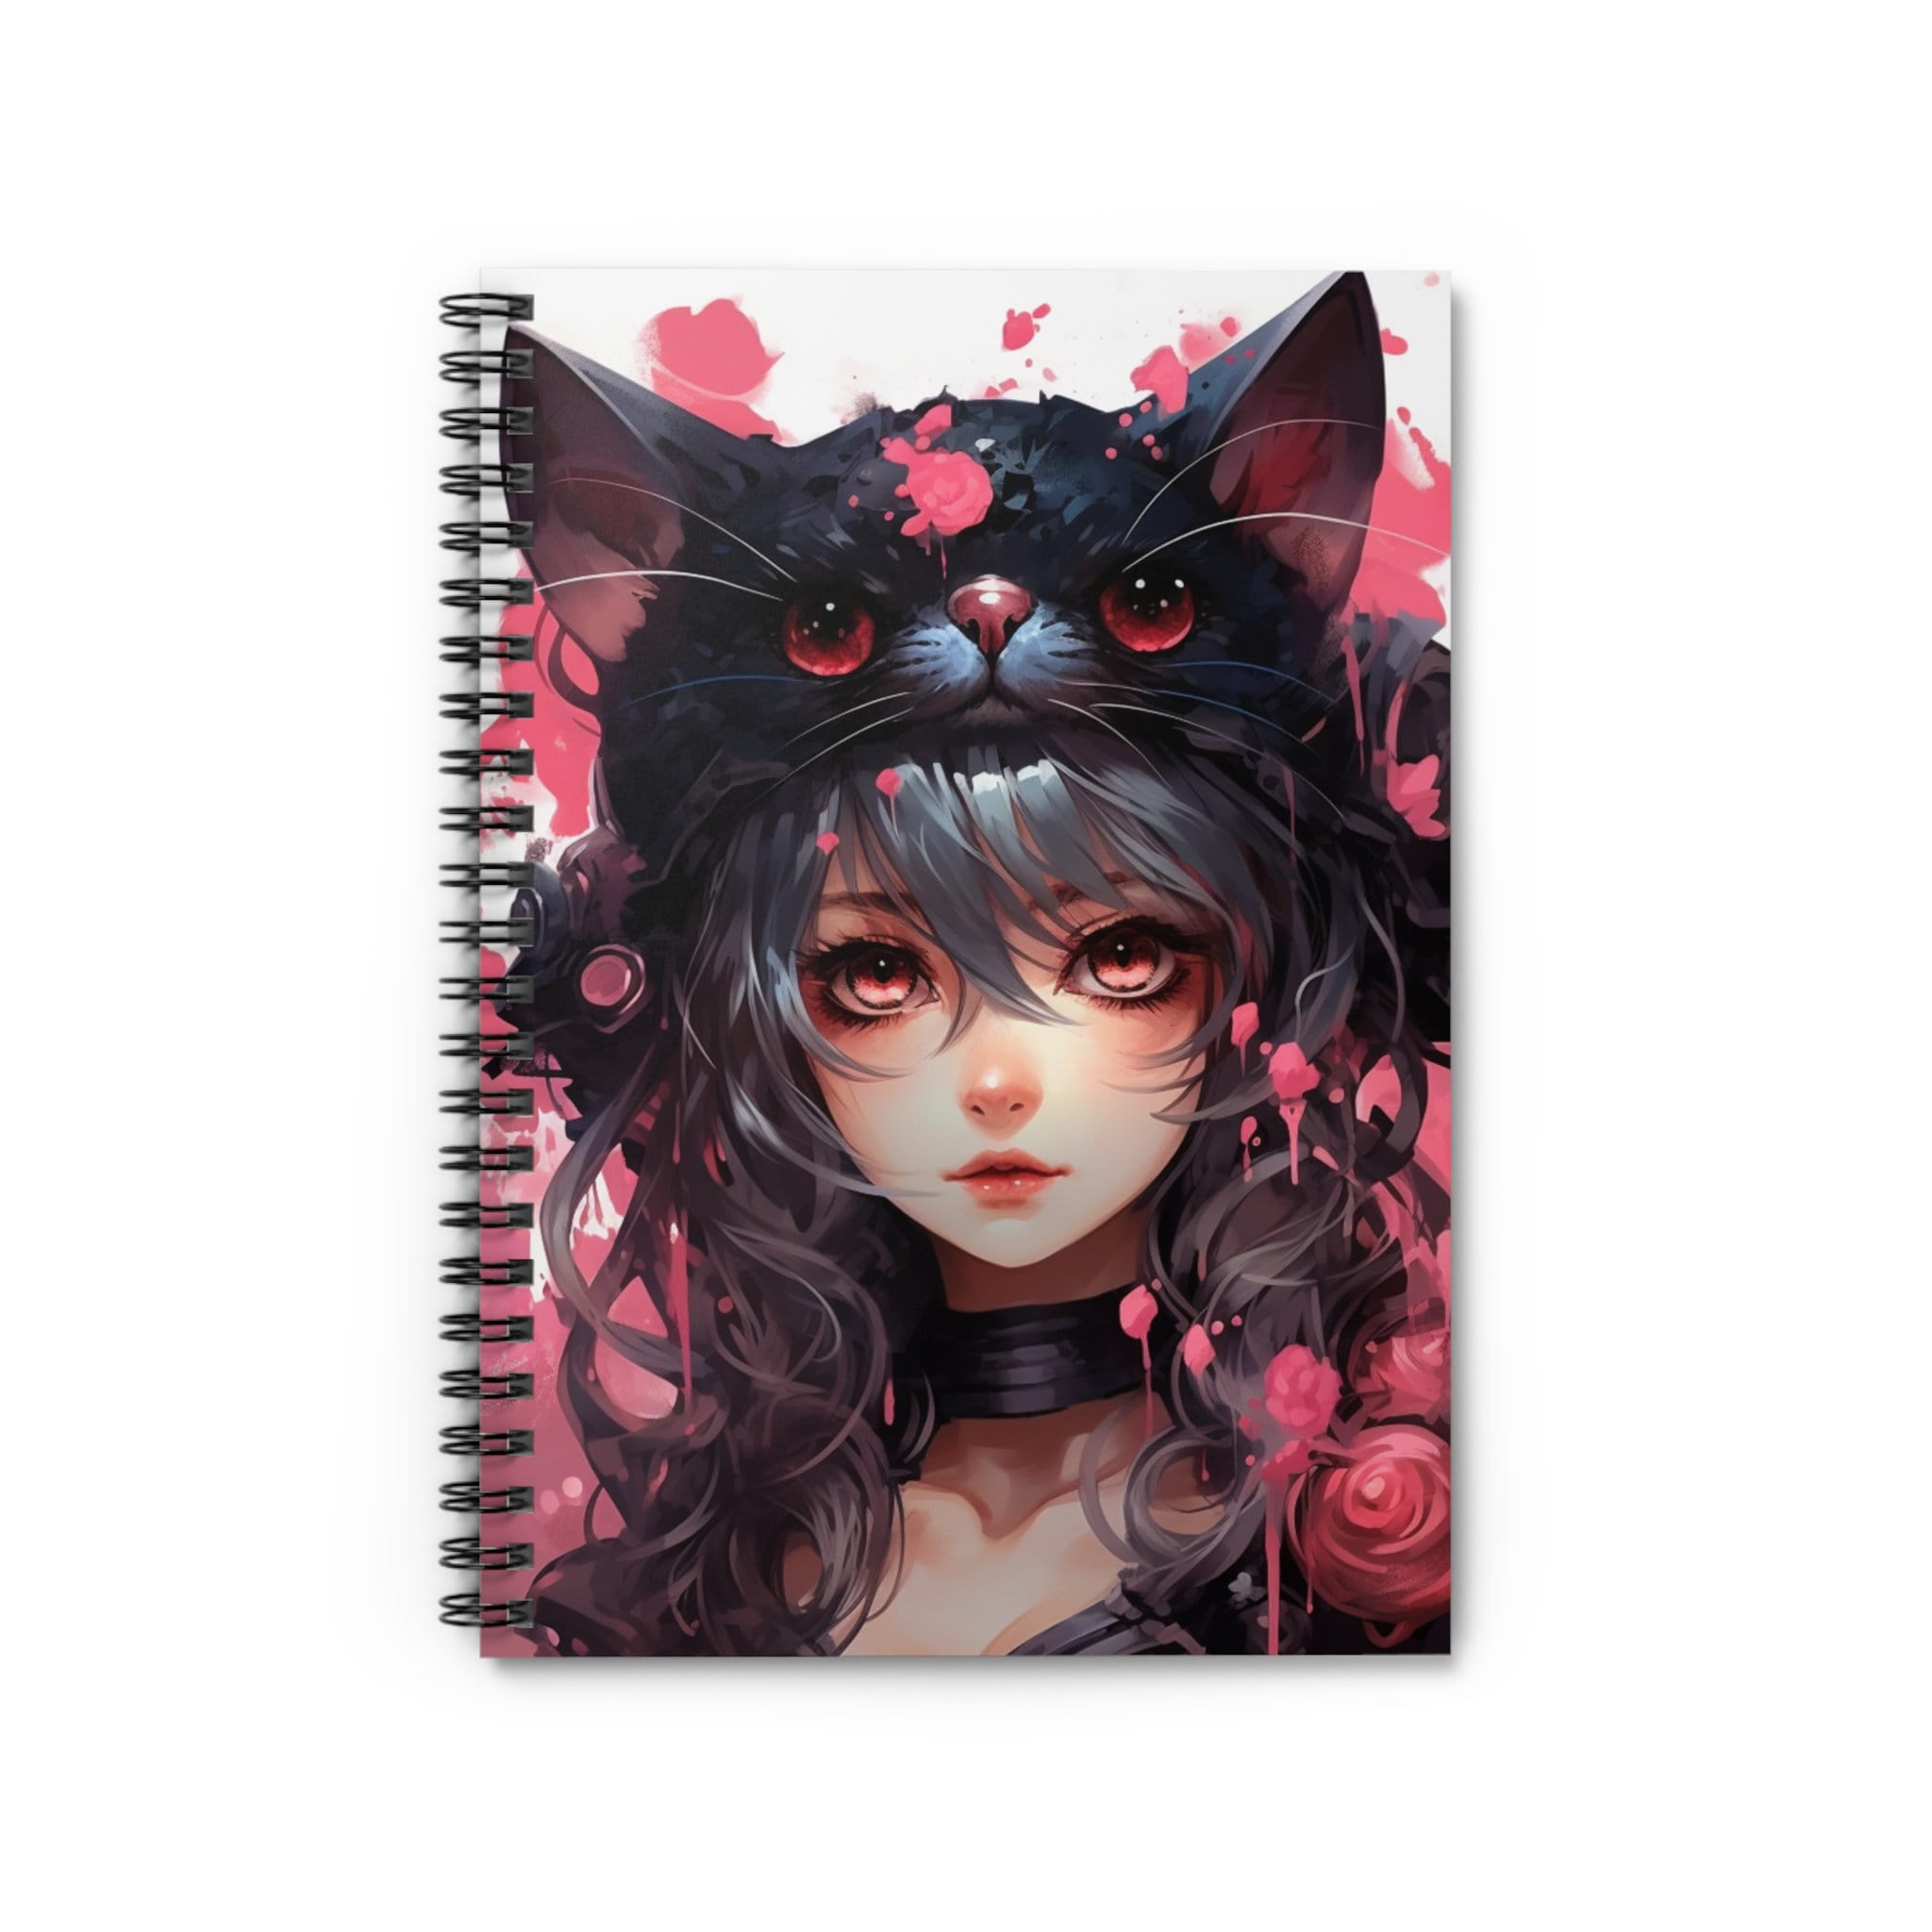 Sussy Baka Funny Japanese Anime Notebook: Cute Anime Girl Journal Or  Notepad Diary, 6 x 9 120 Pages College Ruled Notebook, Anime Lover Gift Idea